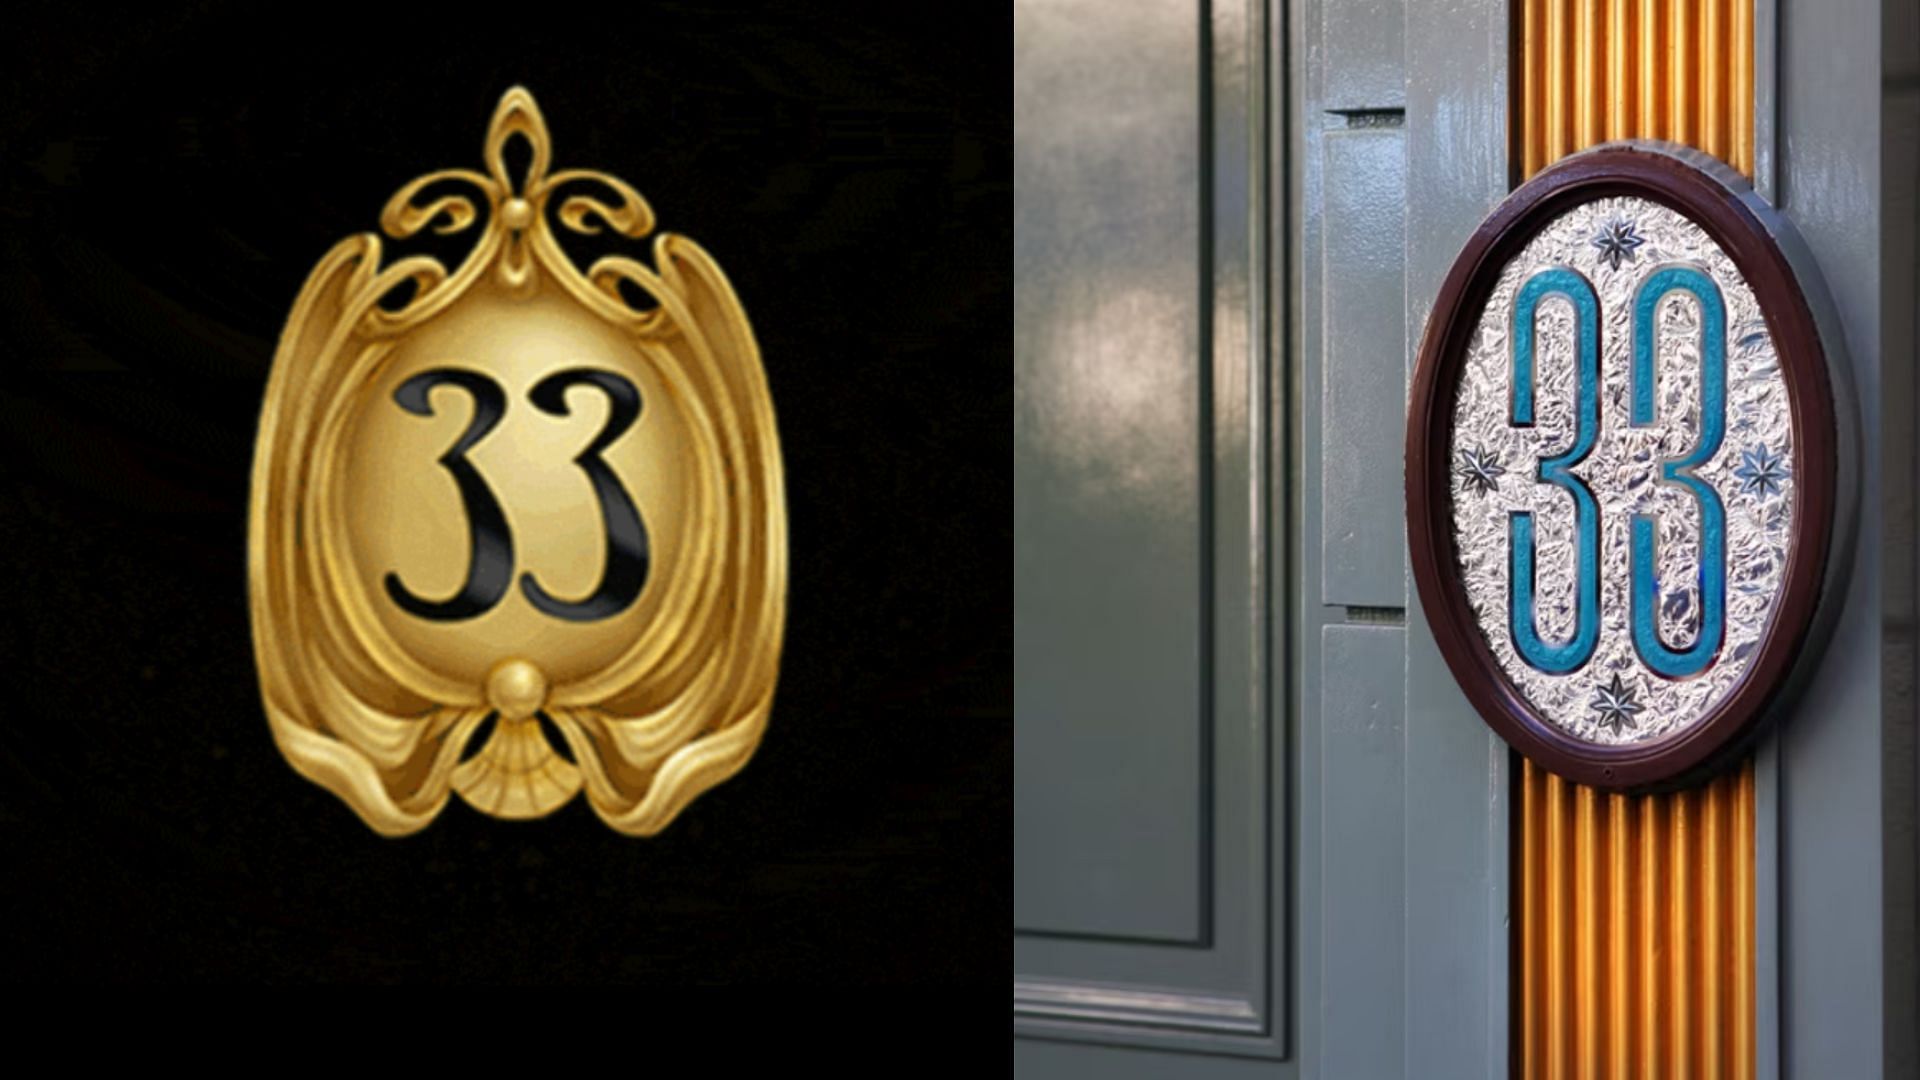 The previous crested logo was changed to a contemporary one. (Image via Disneylandclub33 and Disney parks)